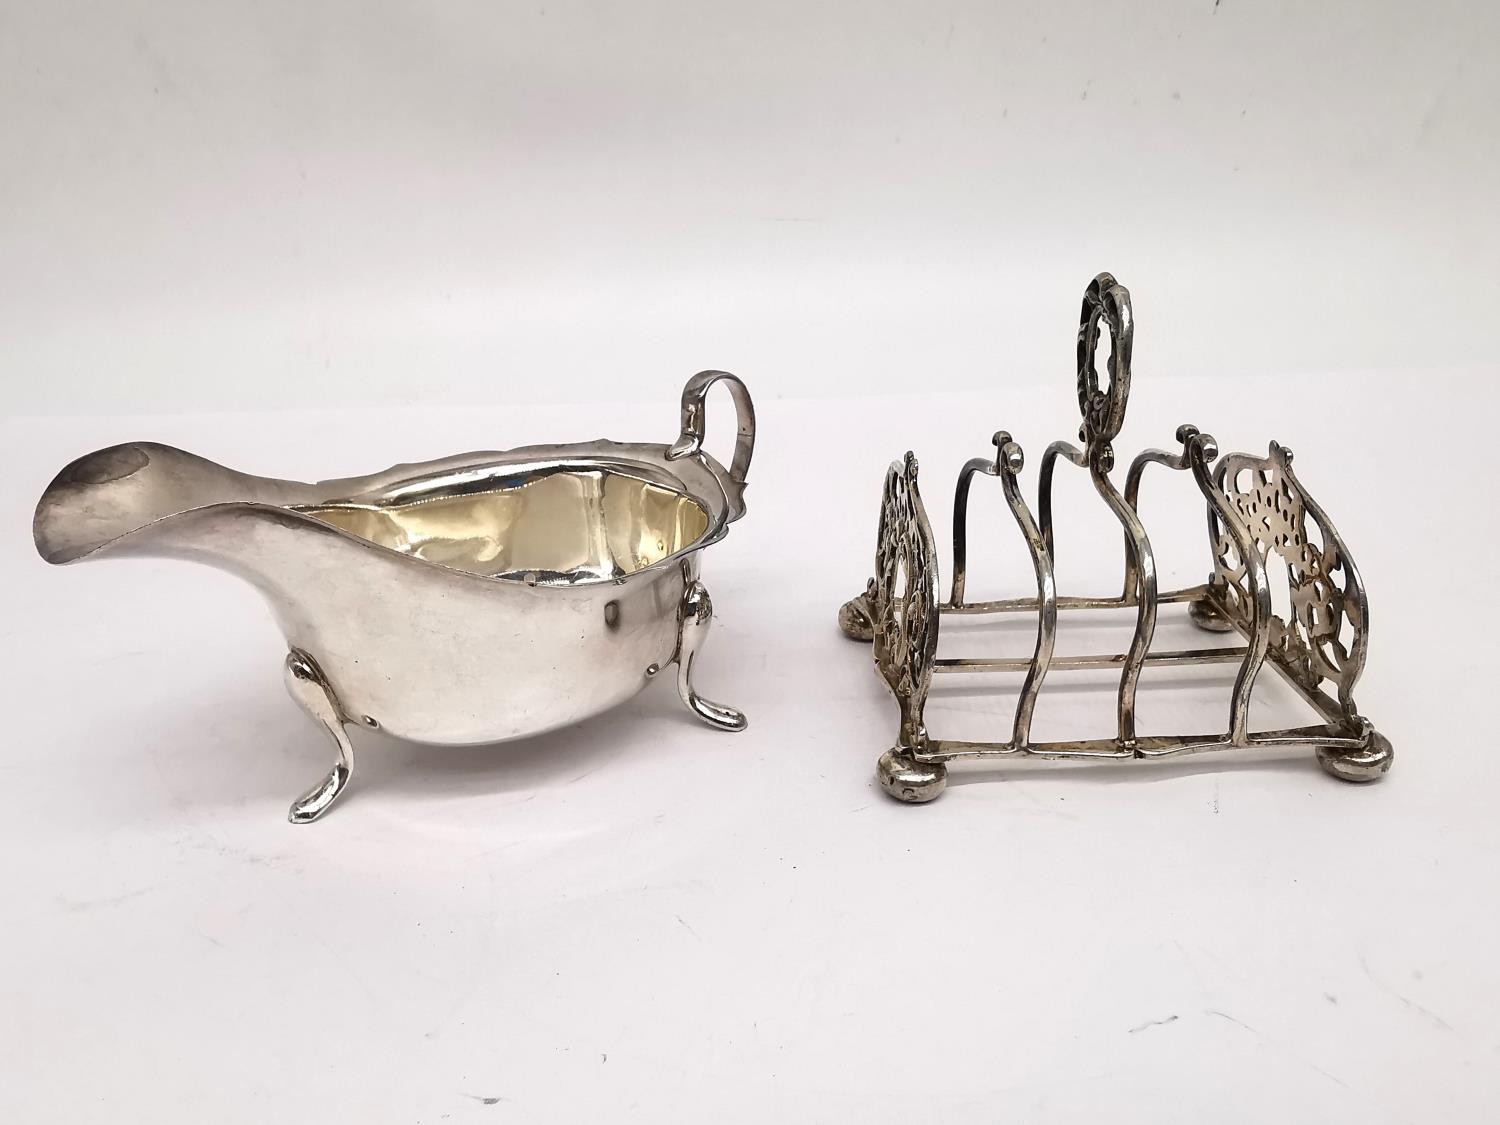 A silver gravy boat by Viners Ltd along with a sterling silver Victorian toast rack by James Dixon & - Image 2 of 8